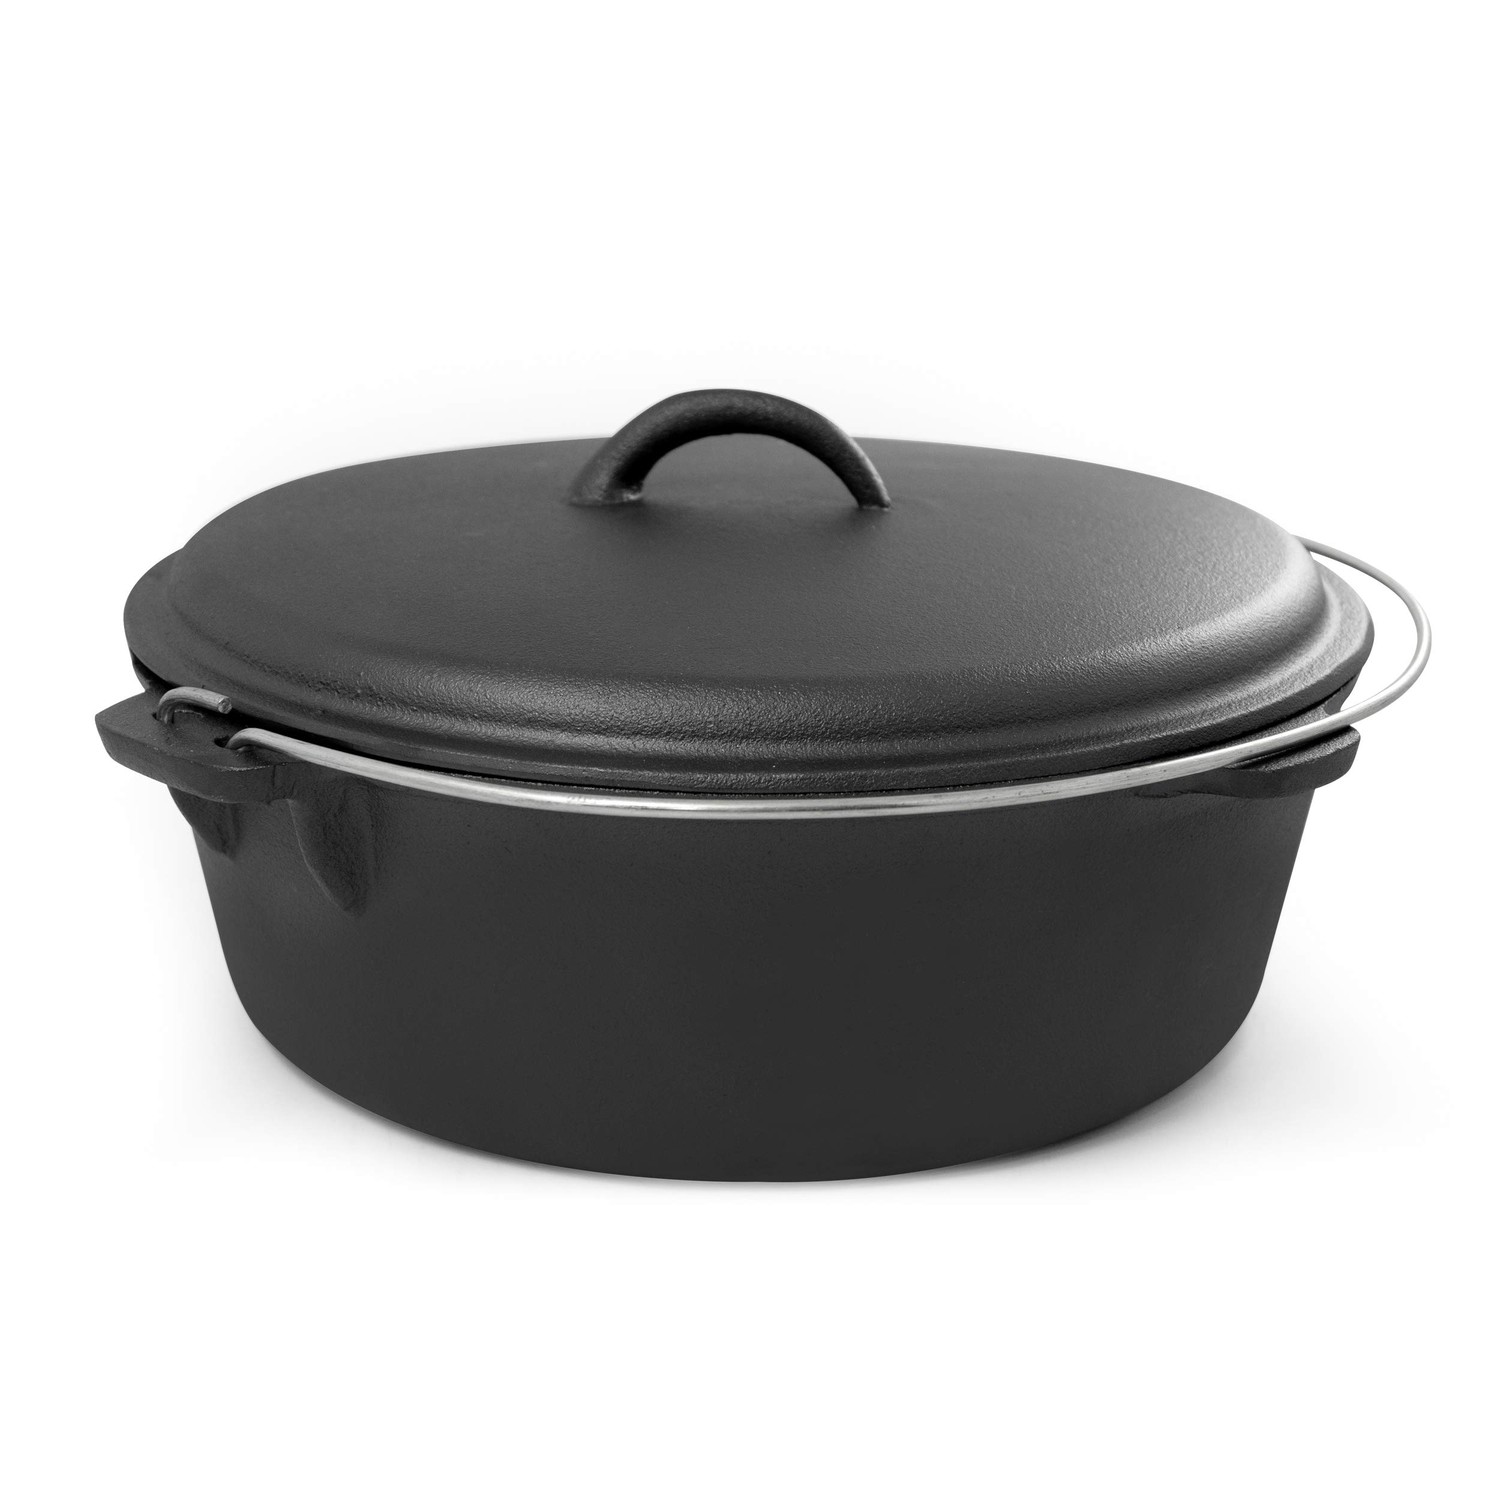 Excelsteel 517 6Qt Cast Iron Camp Dutch Oven With Handles